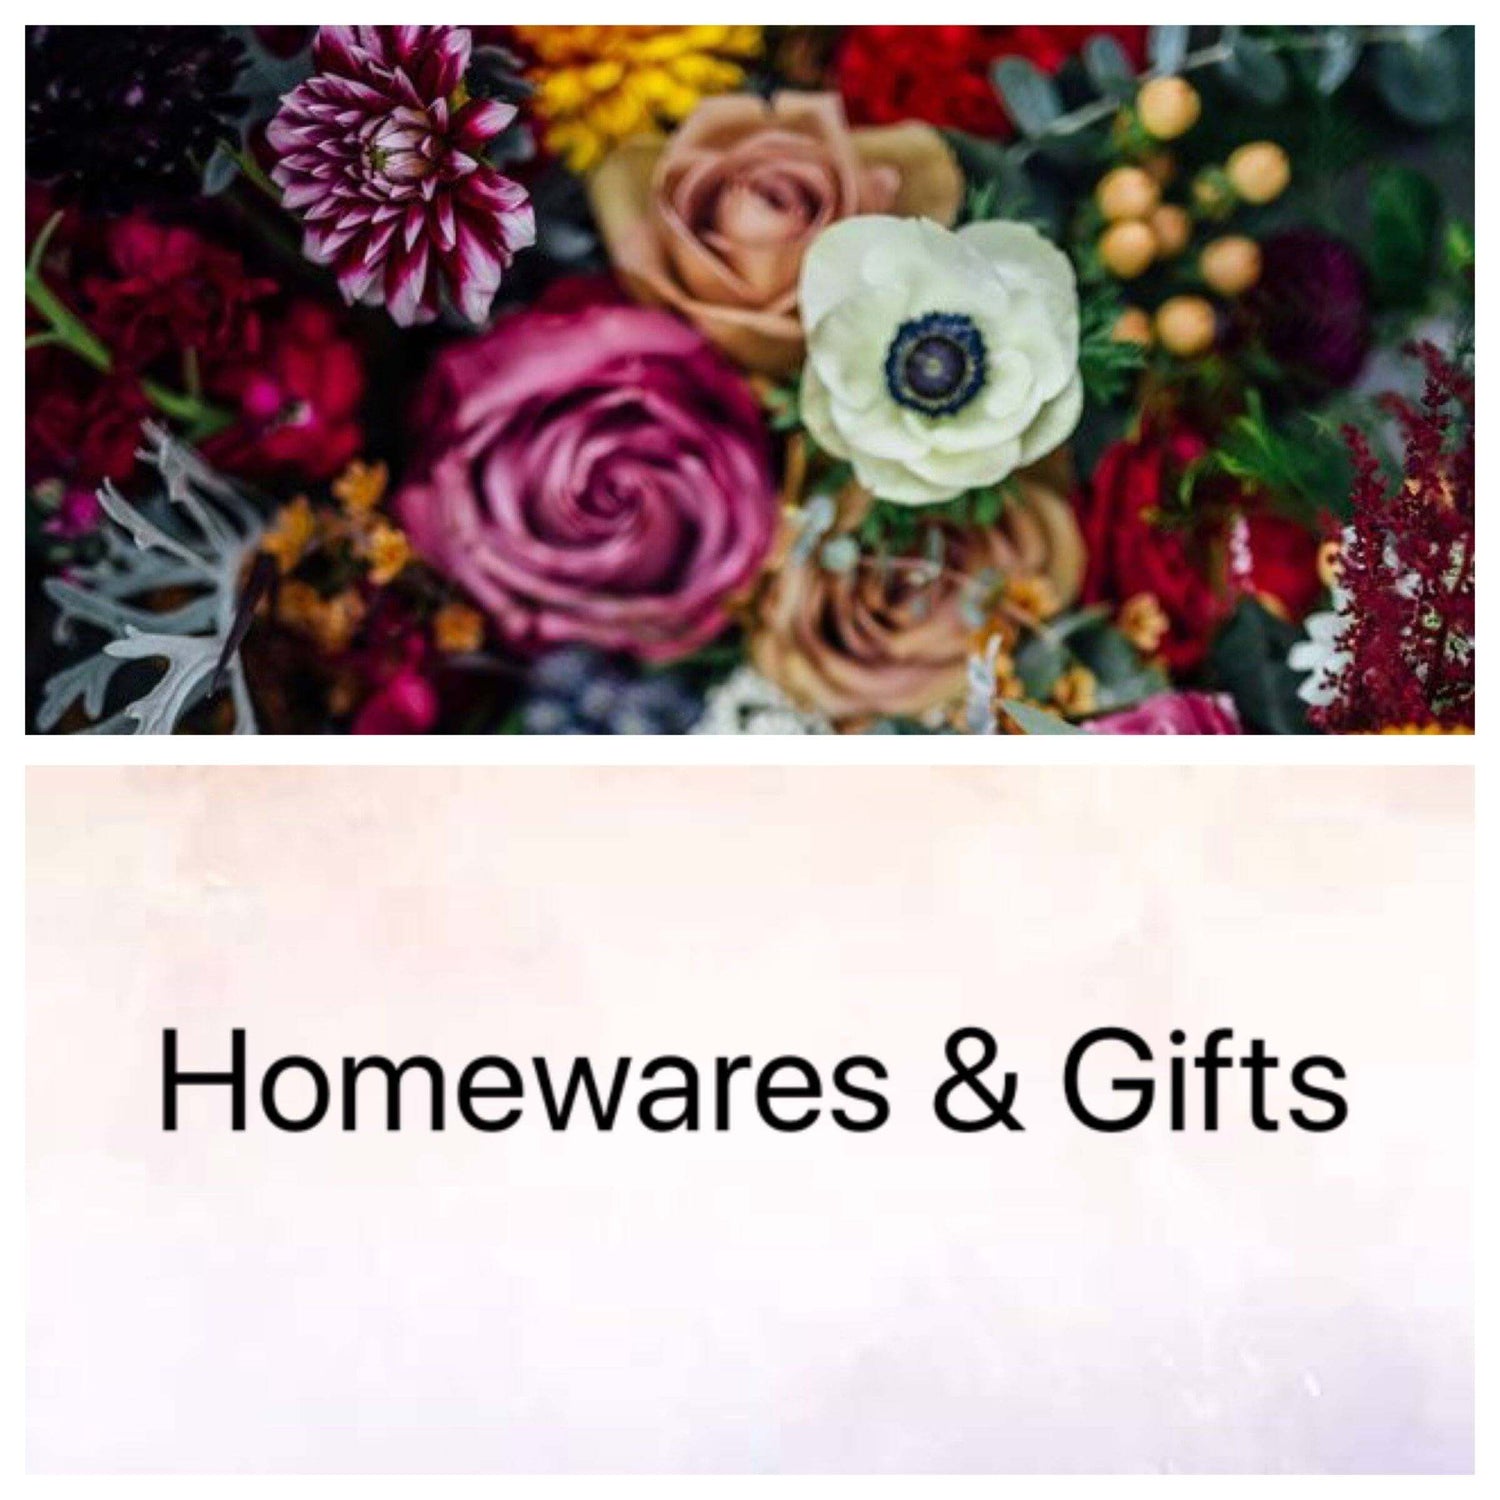 All Homewares & Gifts